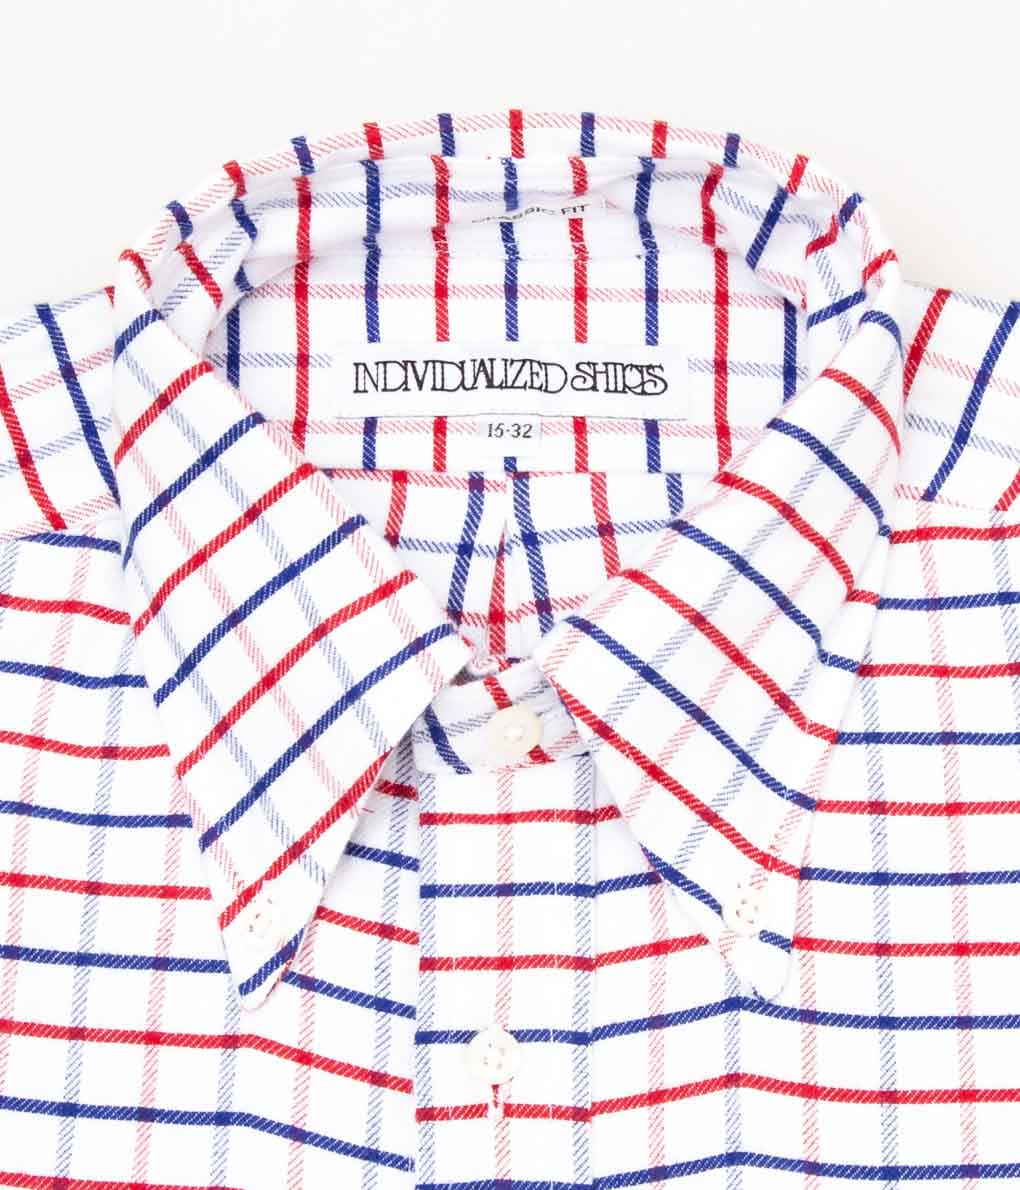 INDIVIDUALIZED SHIRTS "FLANNEL TATTERSALL (CLASSIC FIT BUTTON DOWN SHIRT)(AMERICANA)"